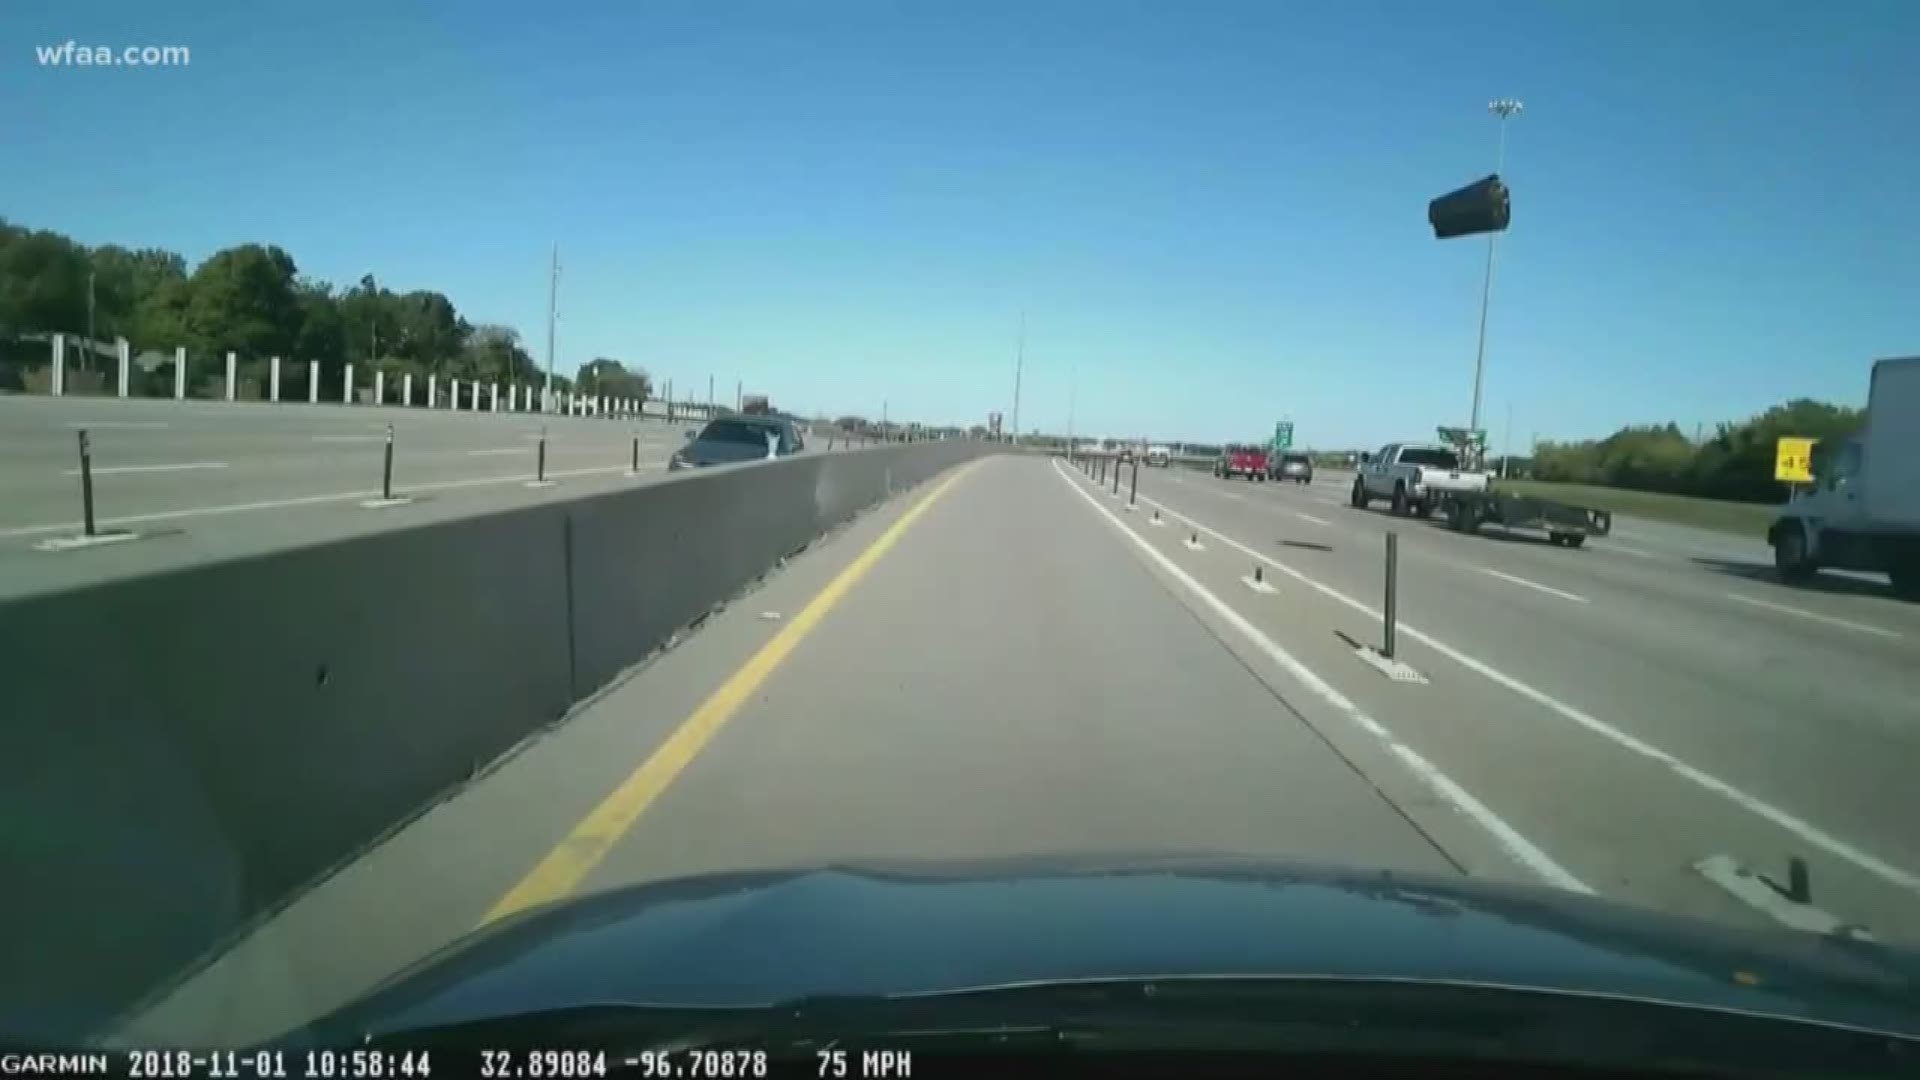 Incoming! Video shows trashcan soaring across 3 lanes and hitting woman's windshield